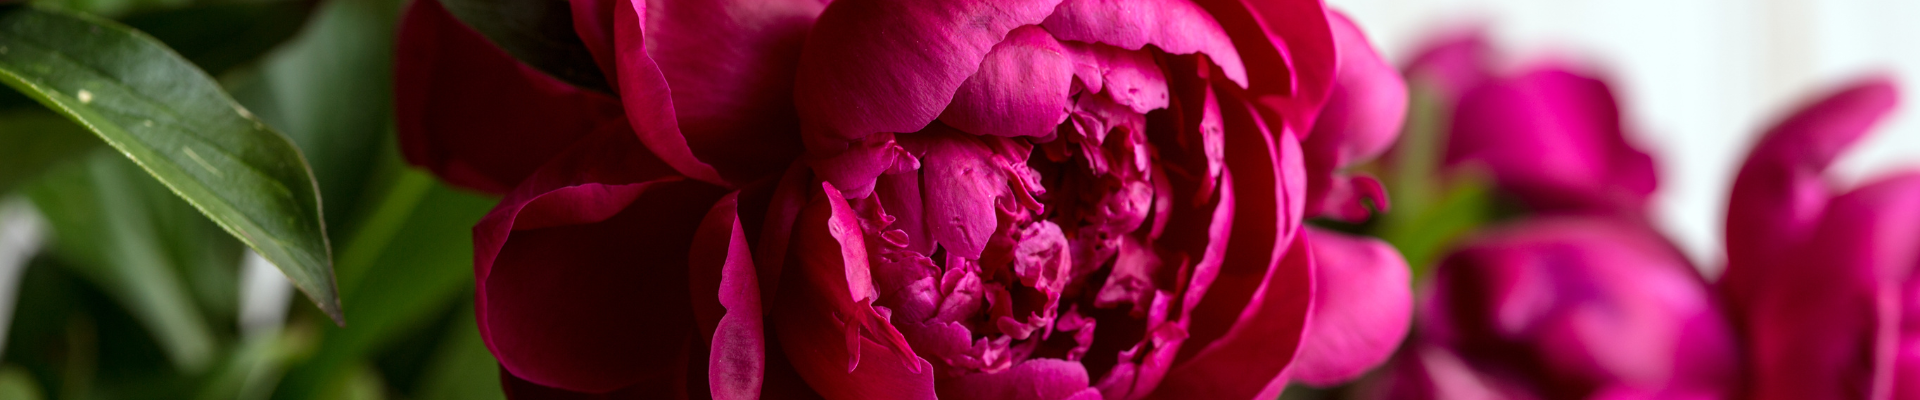 Photograph of deep magenta peonies in a flower bed